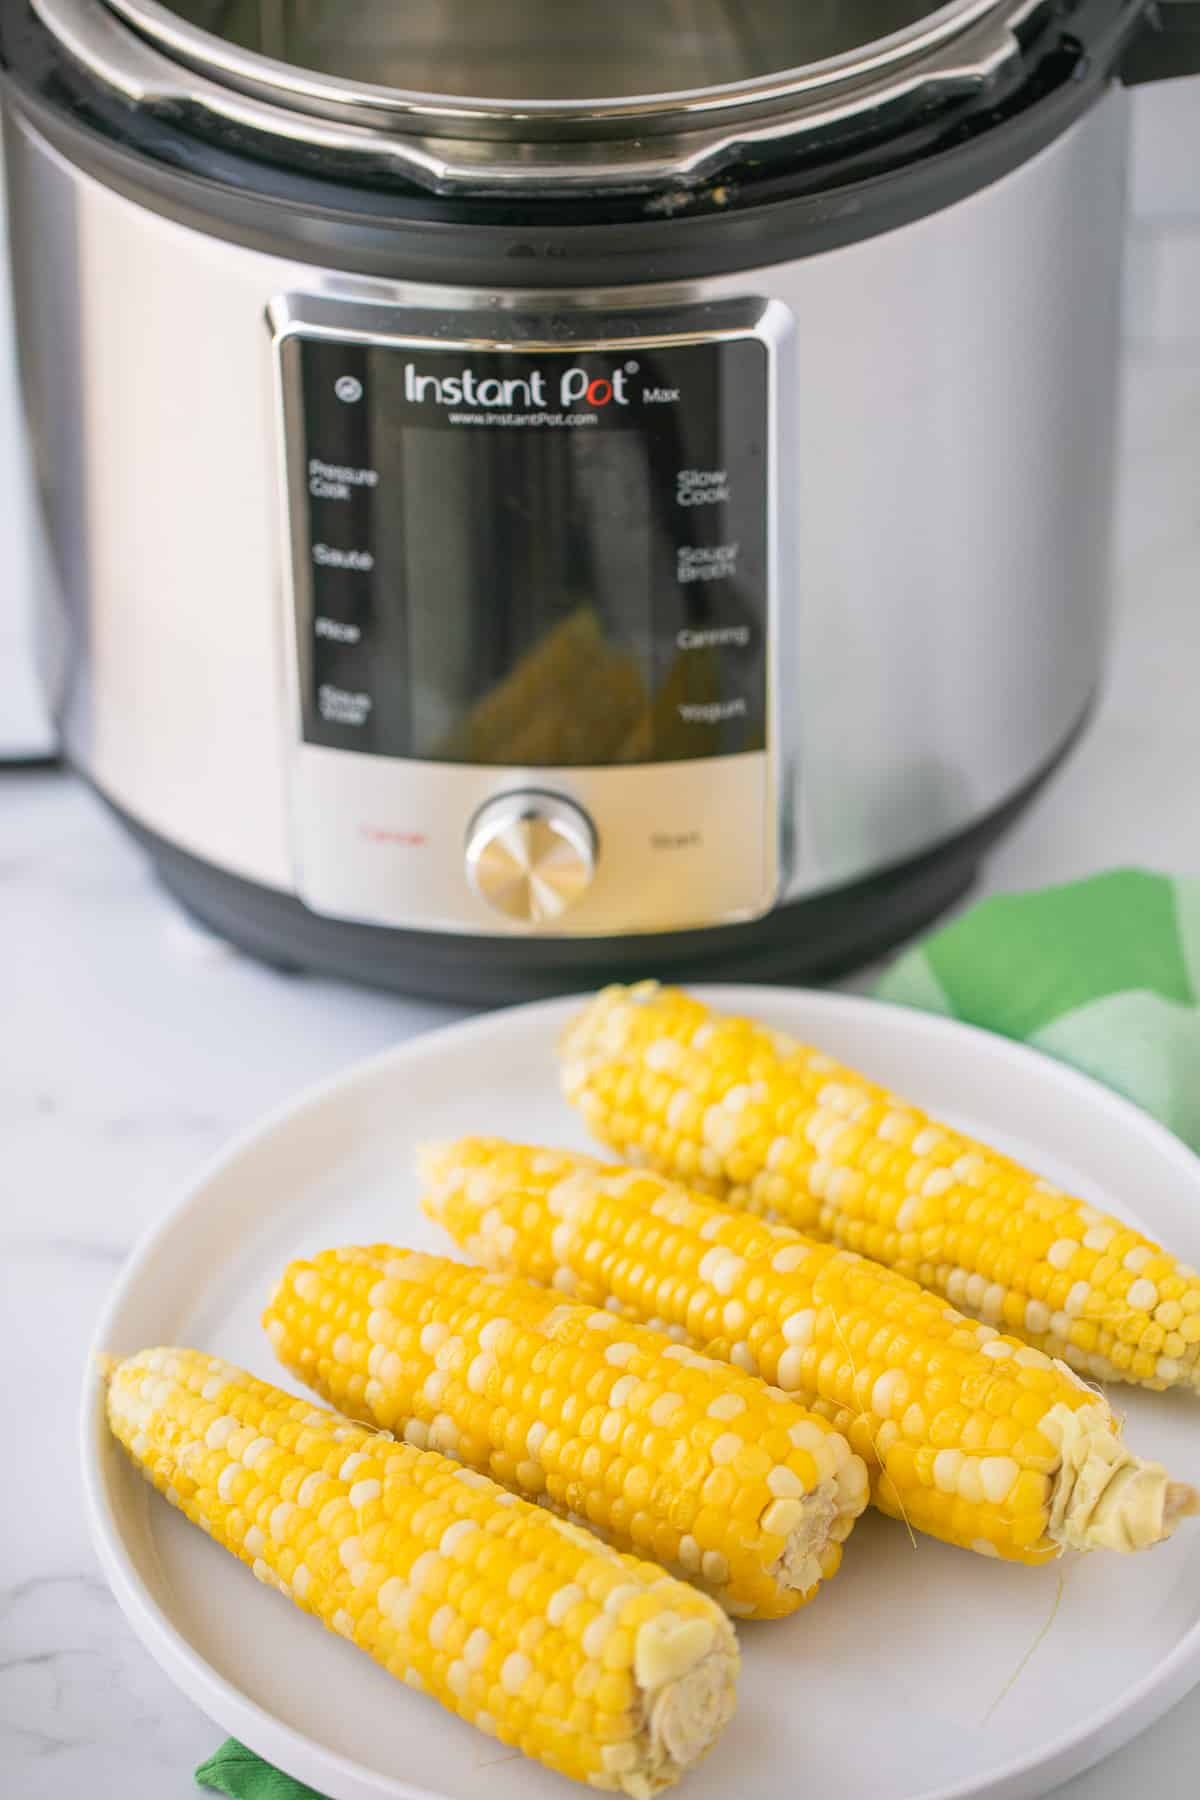 plate of cooked corn on the cob in front of an instant pot pressure cooker